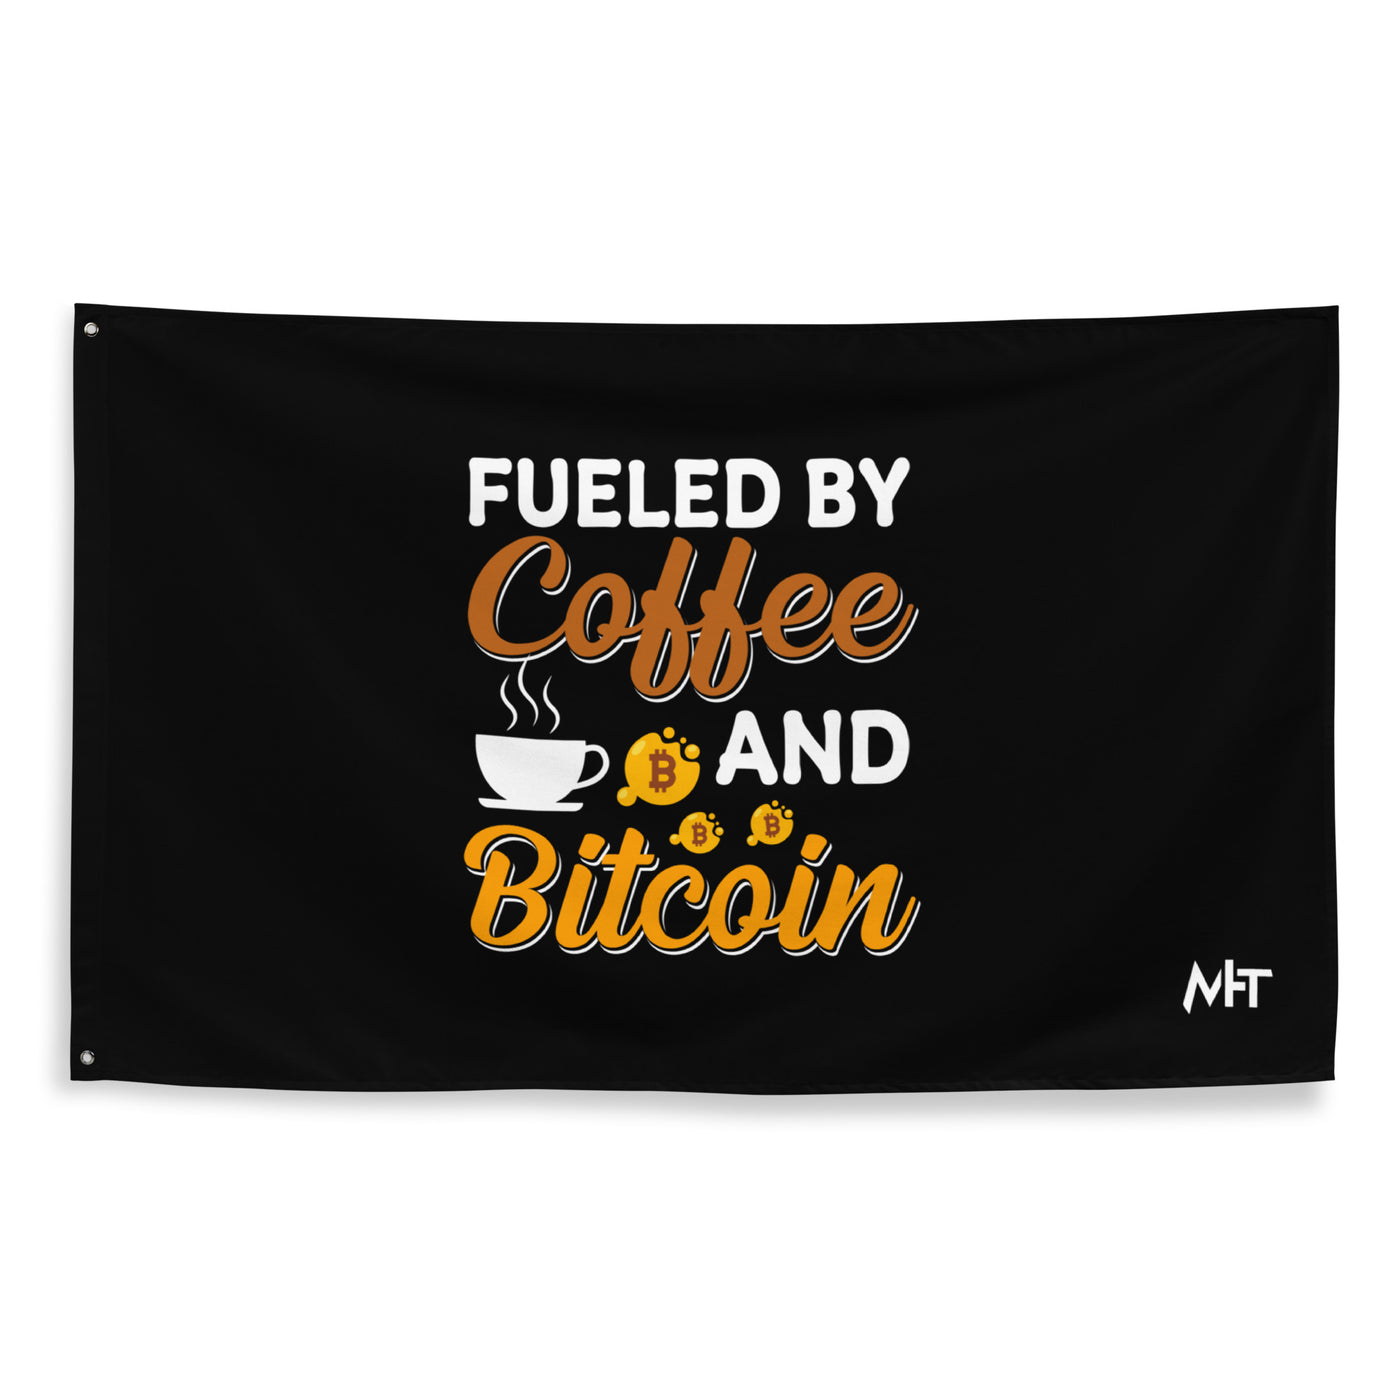 Fueled by Coffee and Bitcoin V1 - Flag